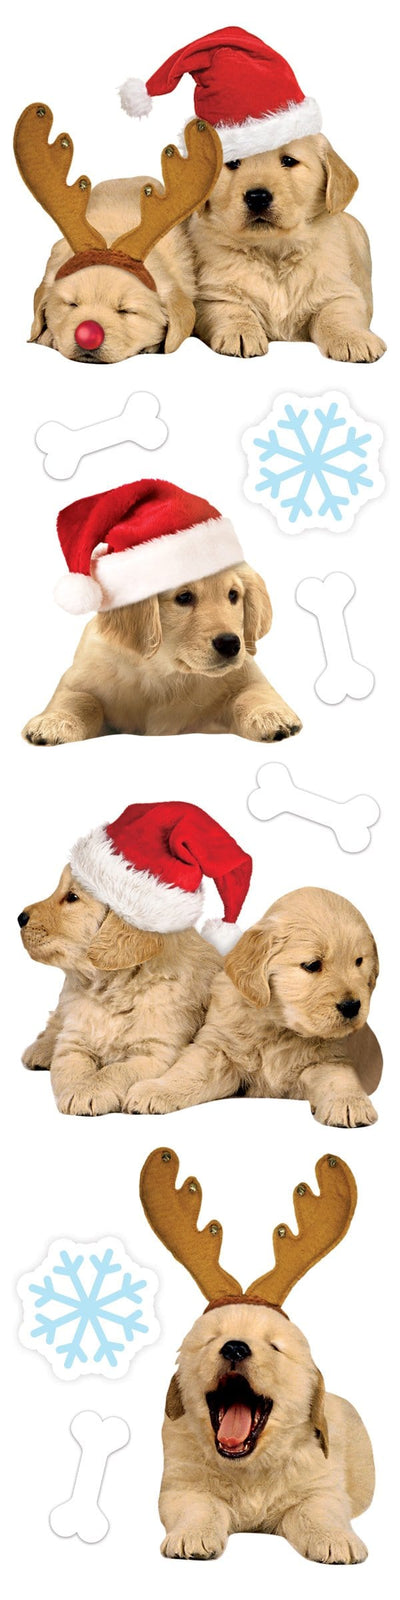 3D scrapbook stickers featuring photo real golden puppies in santa hats shown on white background.